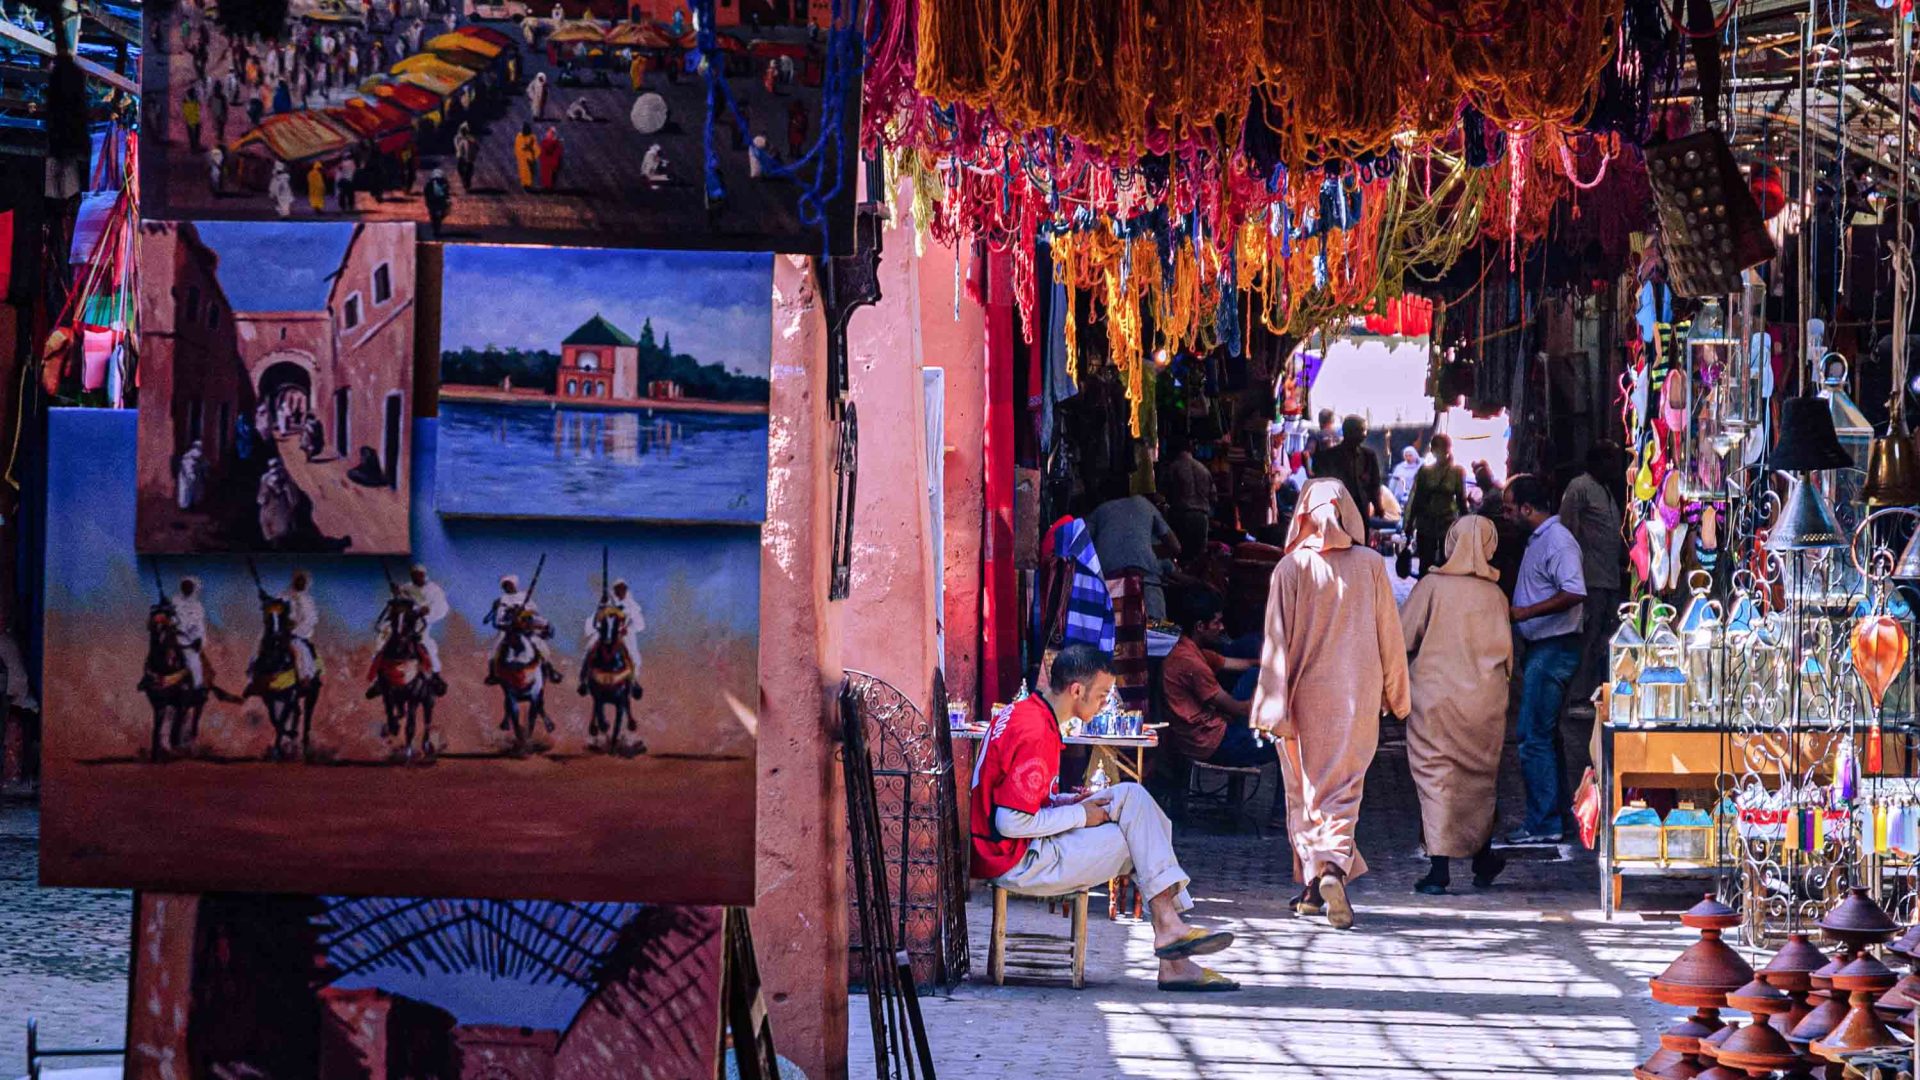 Colourful paintings and wares at the Medina in Marrakech.